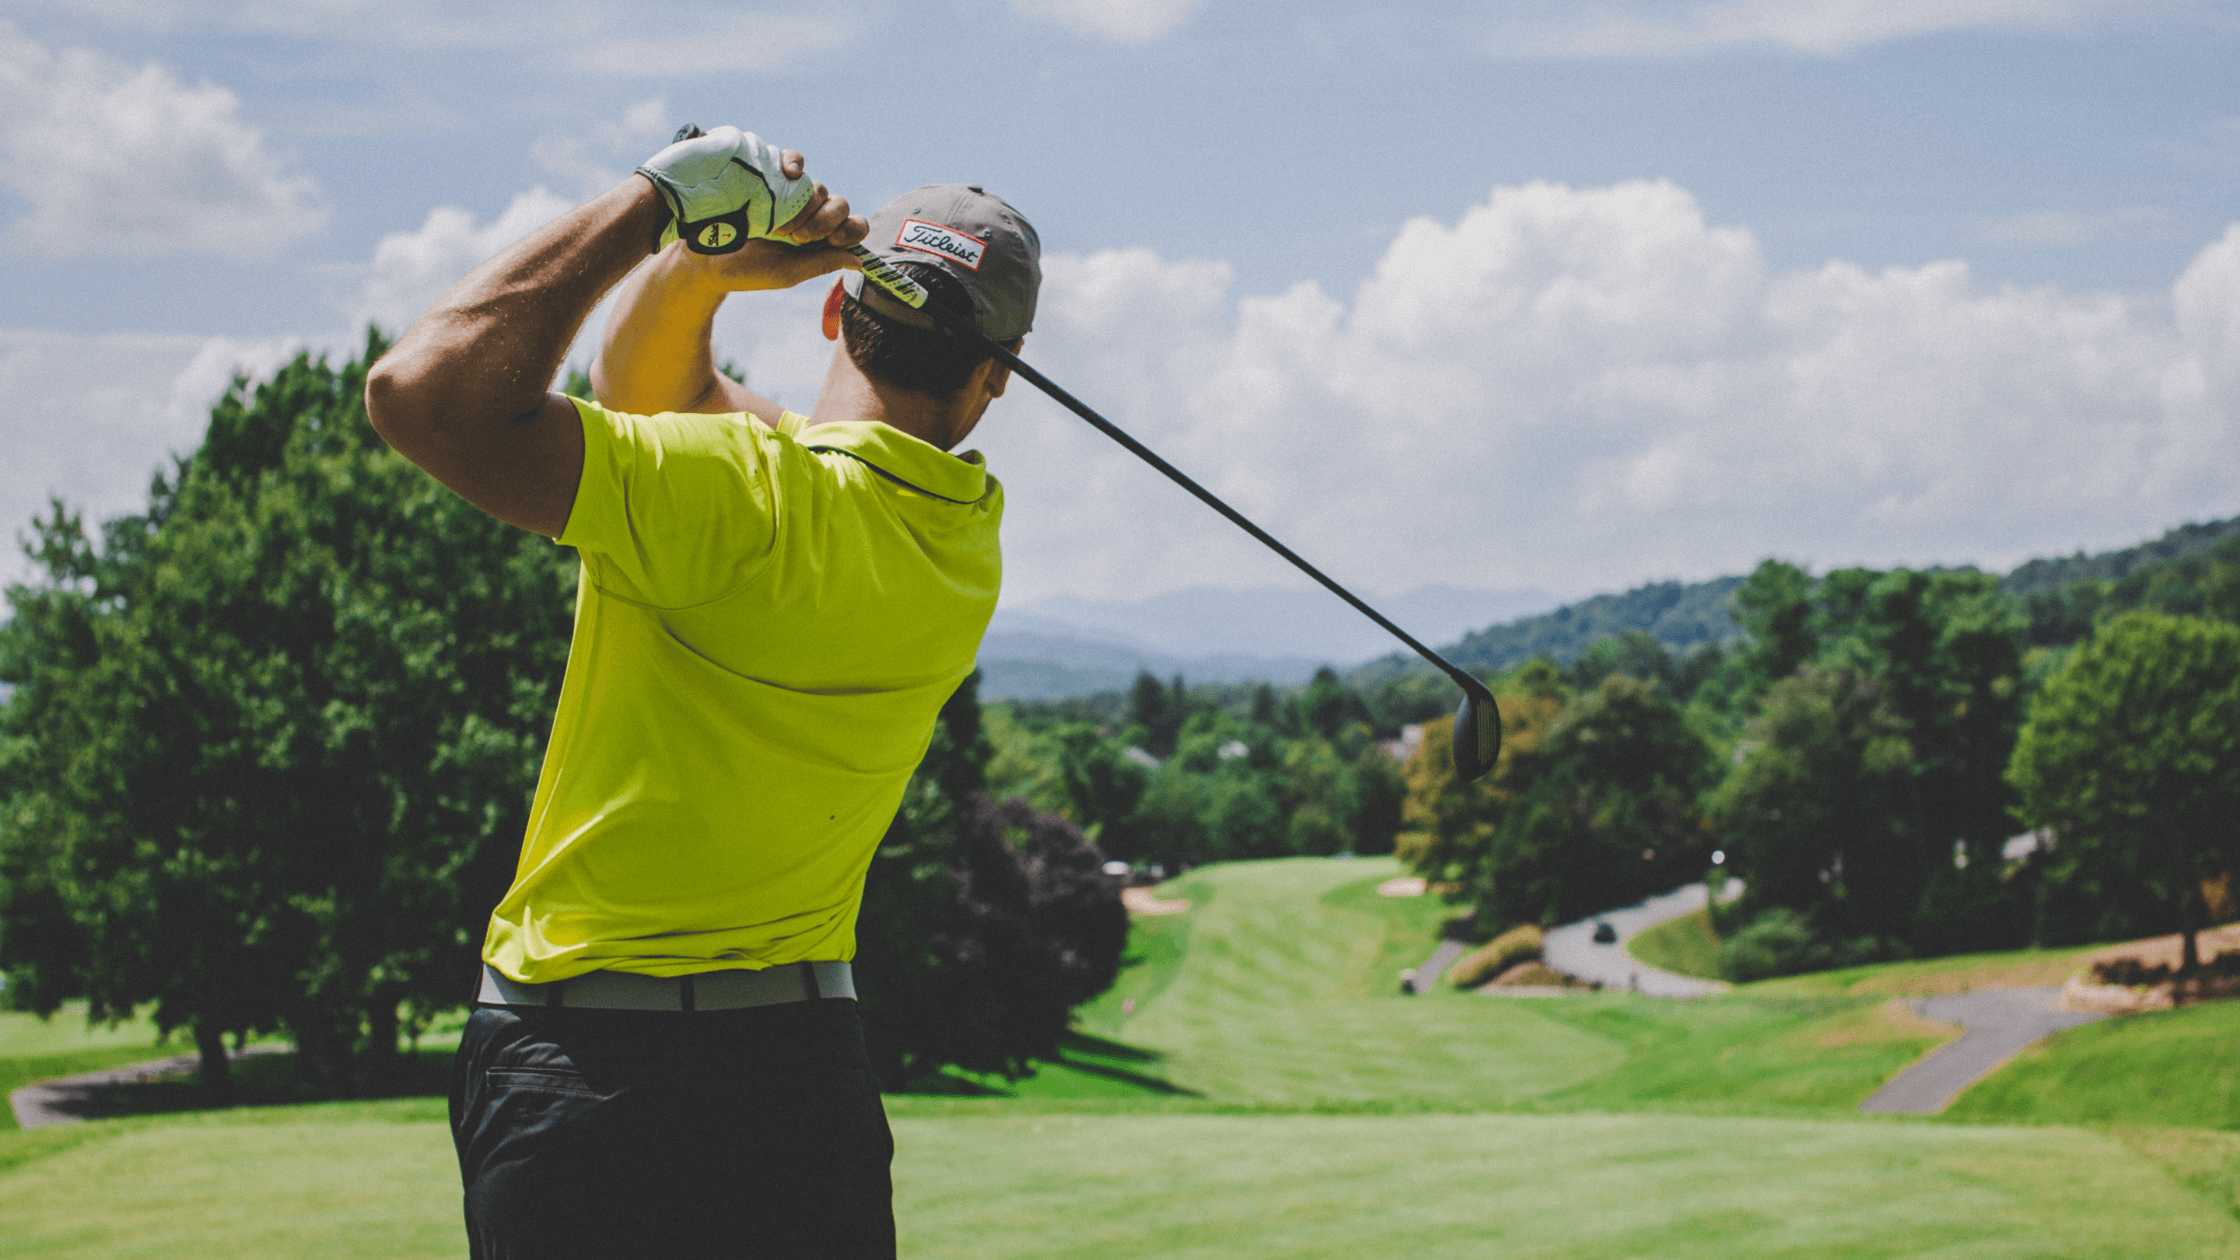 Golf Lessons: Pros, Cons, and Why They Might Be Worth It